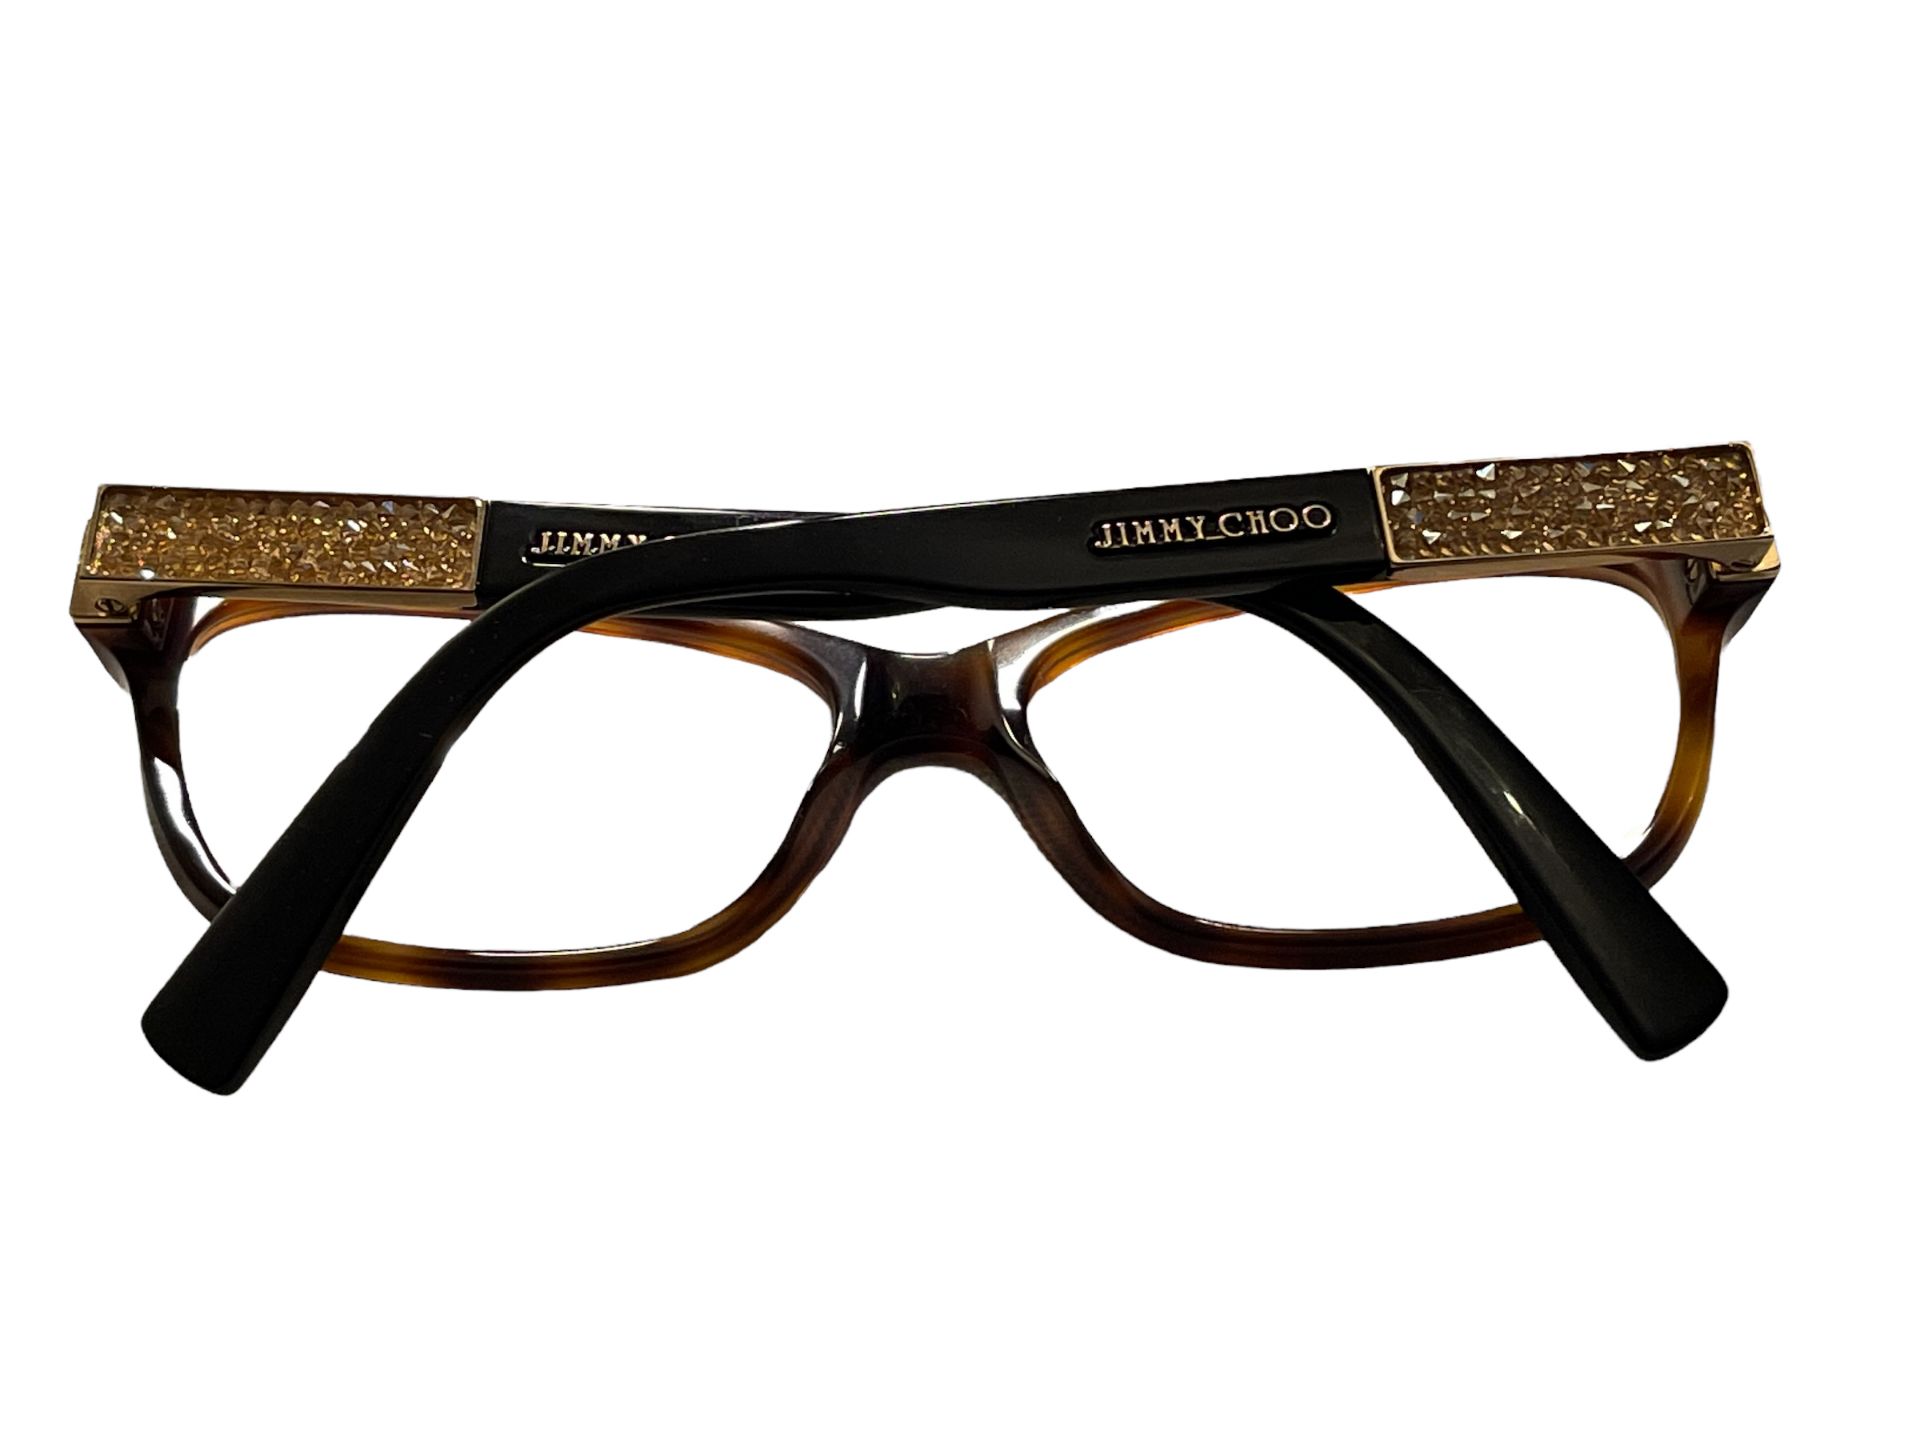 Pair of Ladies JIMMY CHOO Spectacle Frames & Case - Ex Demo or Return from our Private Jet Charte... - Image 12 of 12